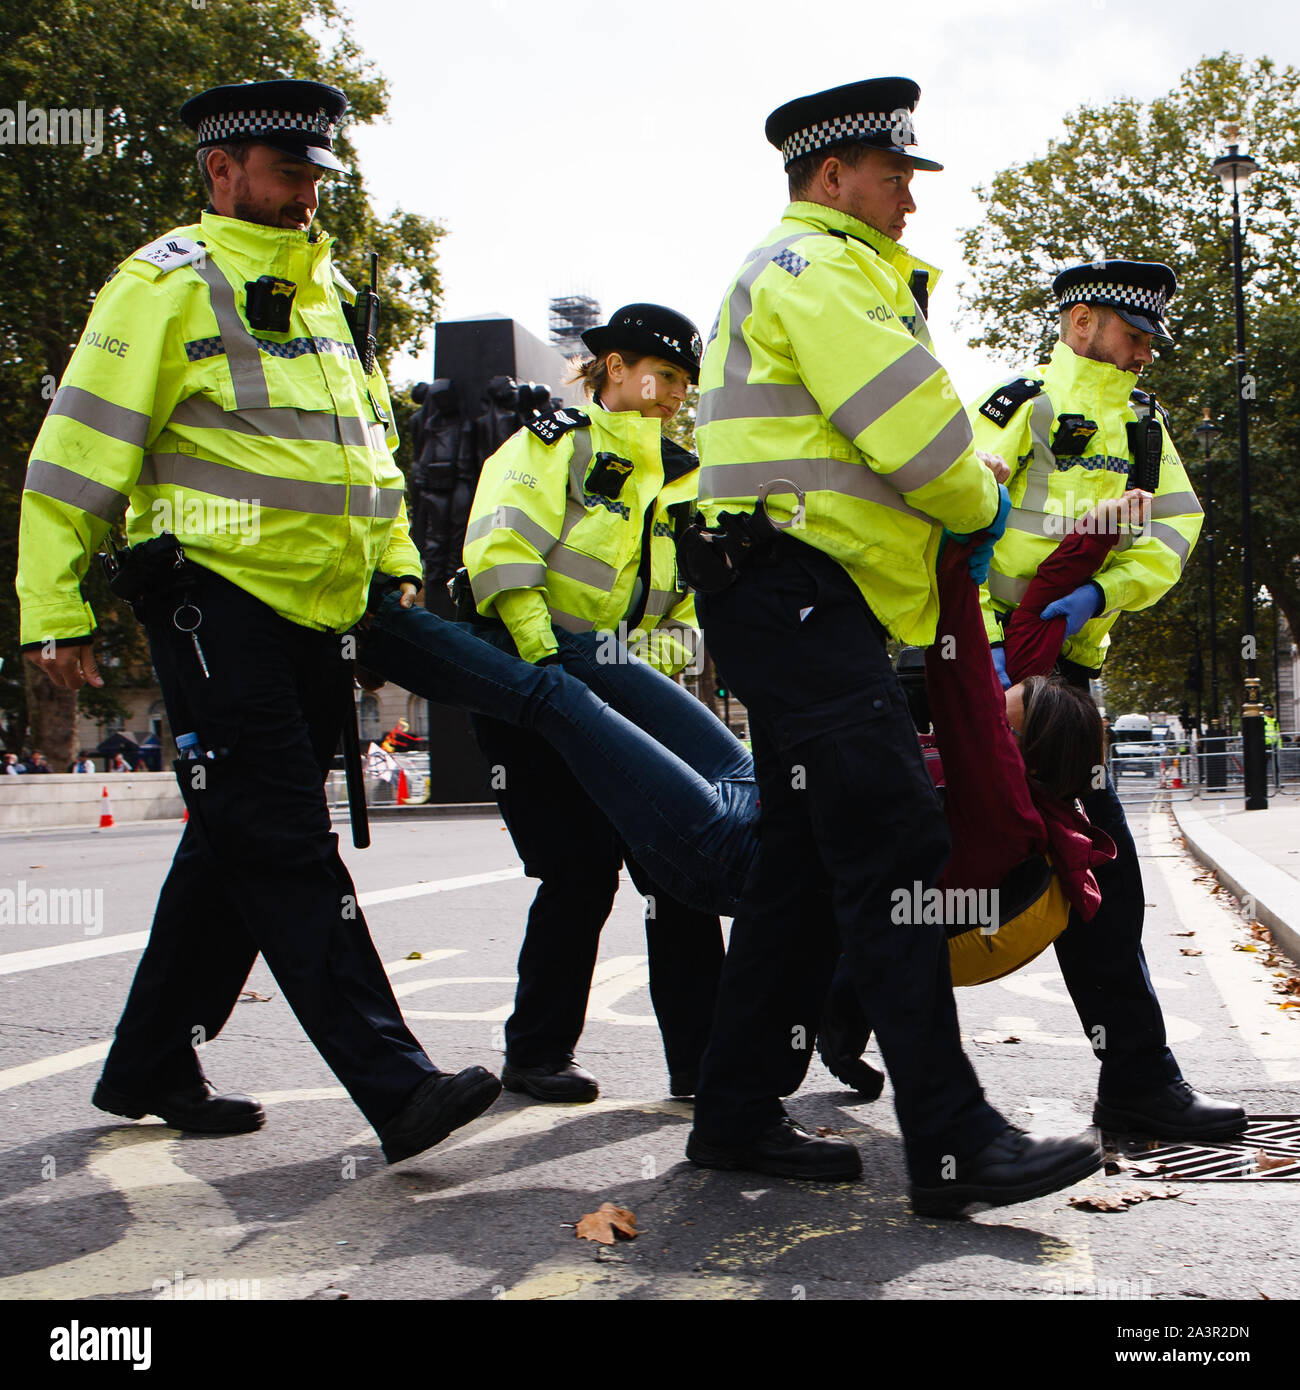 Police officers carry an arrested member of climate change activist movement, Extinction Rebellion (XR) on Whitehall during the third day of the group's 'International Rebellion' in London.Police officers continue to clear demonstrators and tents from sites across Westminster, with activists having been warned about moving to a designated protest area around Nelson's Column in Trafalgar Square or face arrest. Similar blockades by Extinction Rebellion in April, at sites including Oxford Circus and Waterloo Bridge, saw more than 1,000 arrested, a tactic promoted by XR founder Roger Hallam as a m Stock Photo